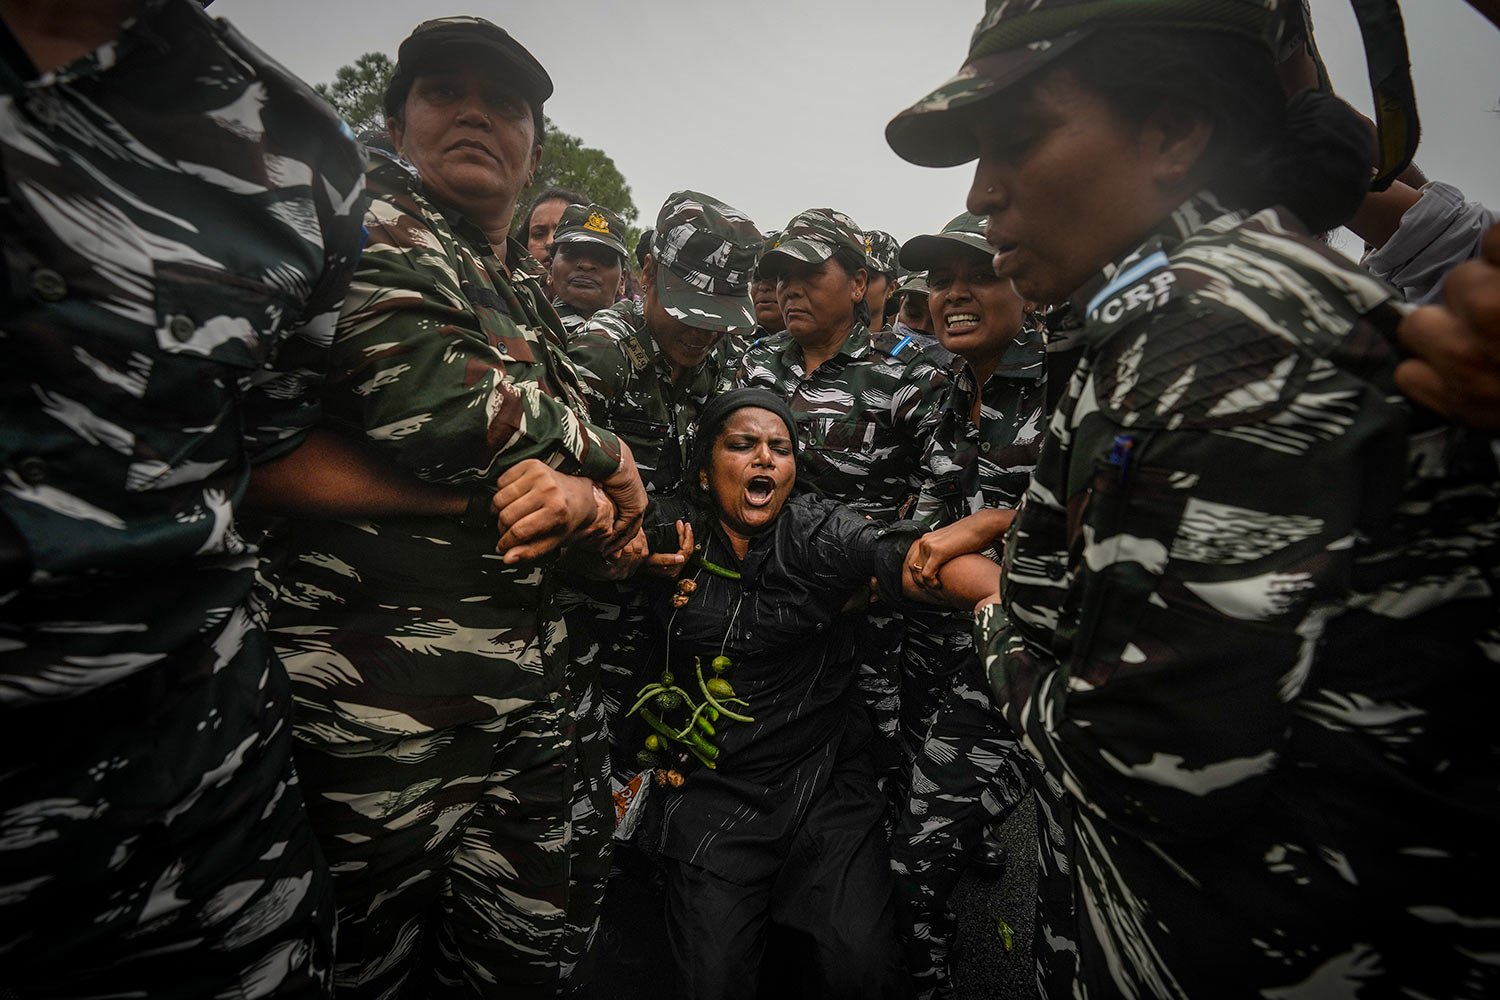  Indian paramilitary soldiers detain a lawmaker from India's opposition Congress party during a protest in New Delhi, India, Friday, Aug. 5, 2022. (AP Photo/Altaf Qadri) 